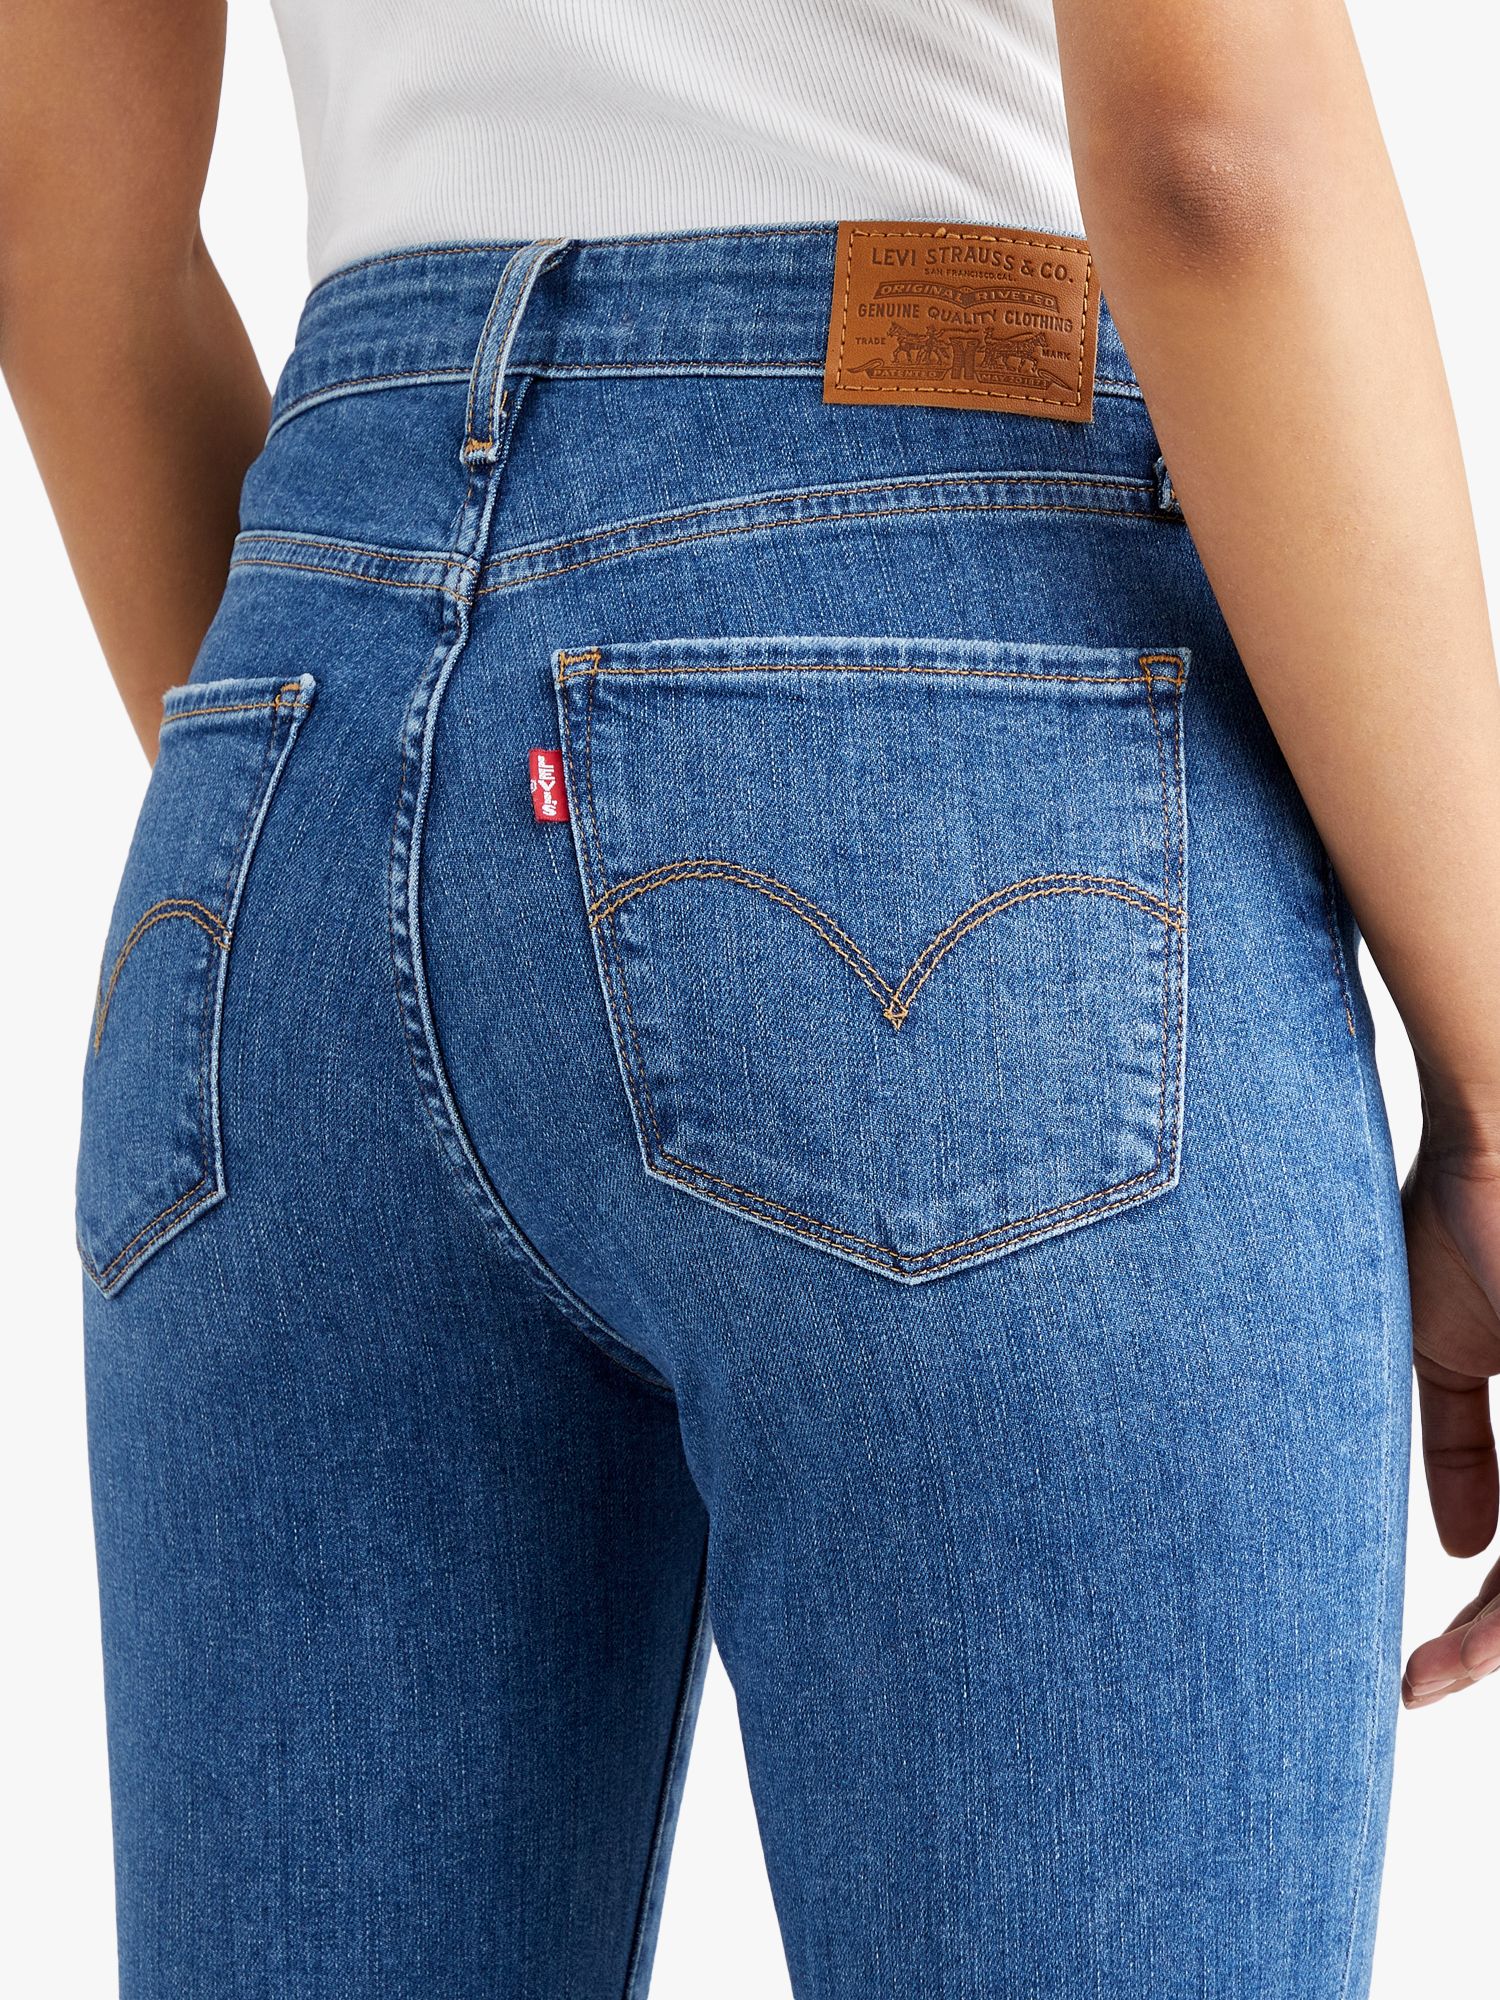 Levi's 721 High Rise Skinny Jeans, Blow Your Mind at John Lewis & Partners